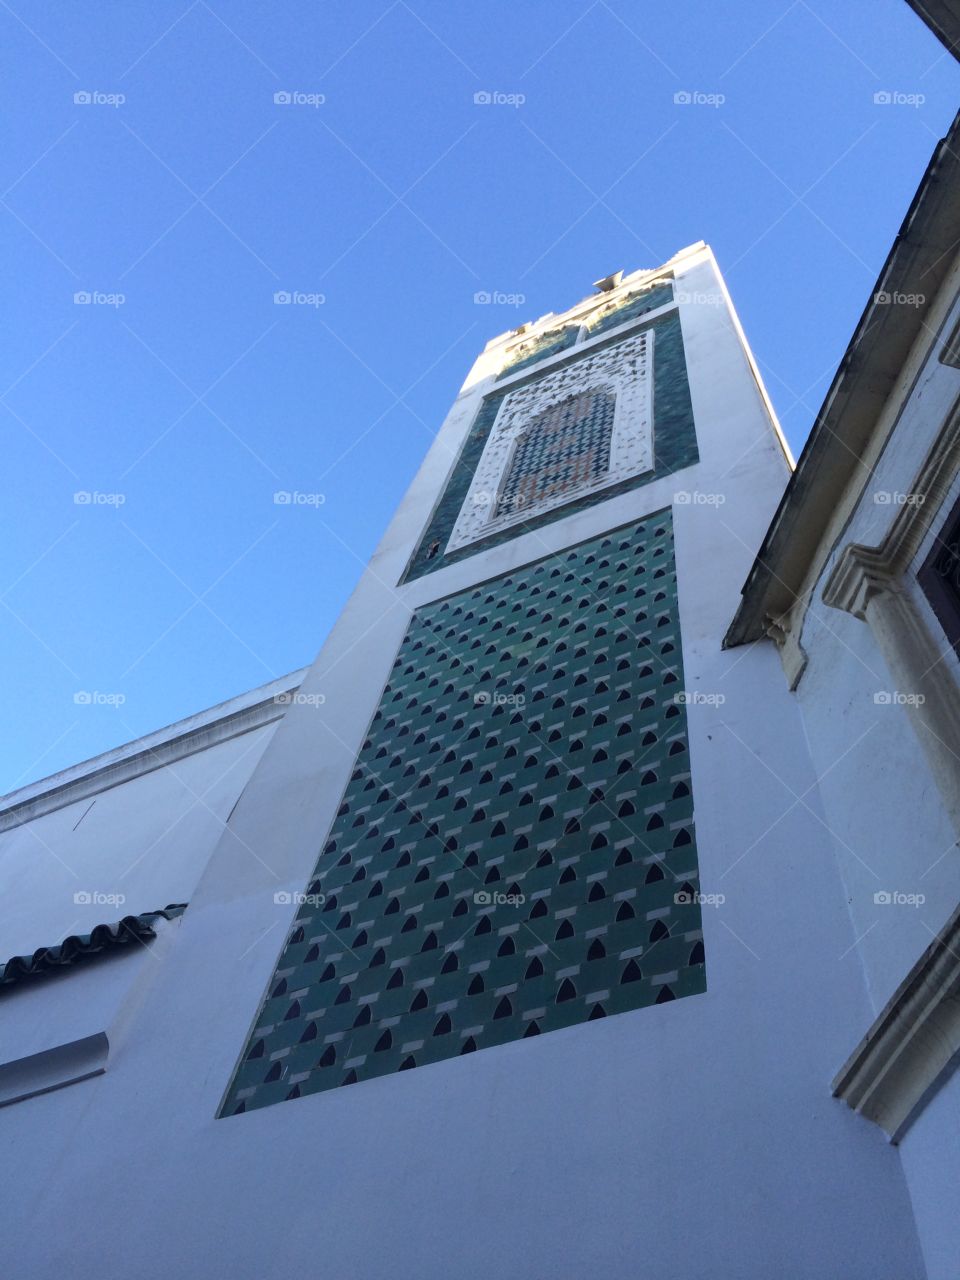 Clear day in Tangier